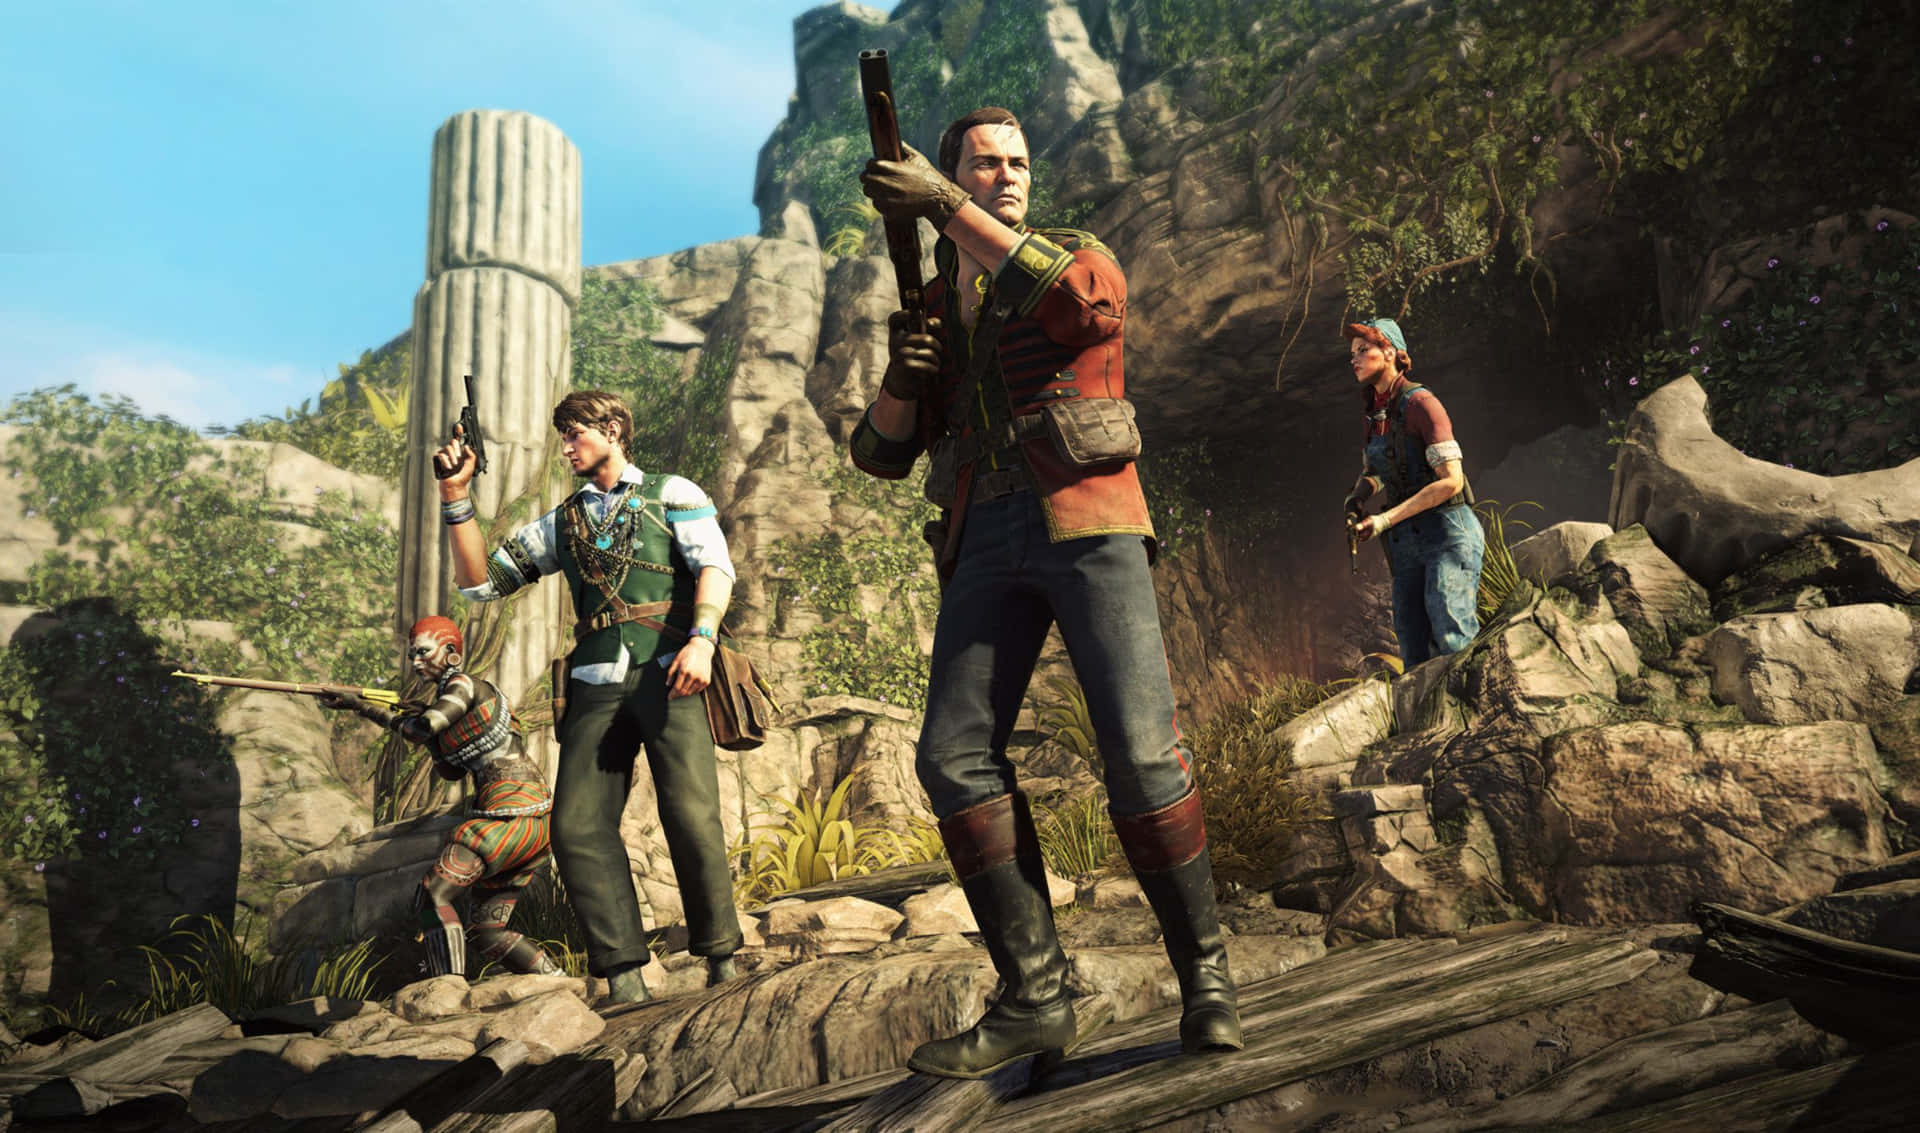 Join the Strange Brigade and battle against evil forces